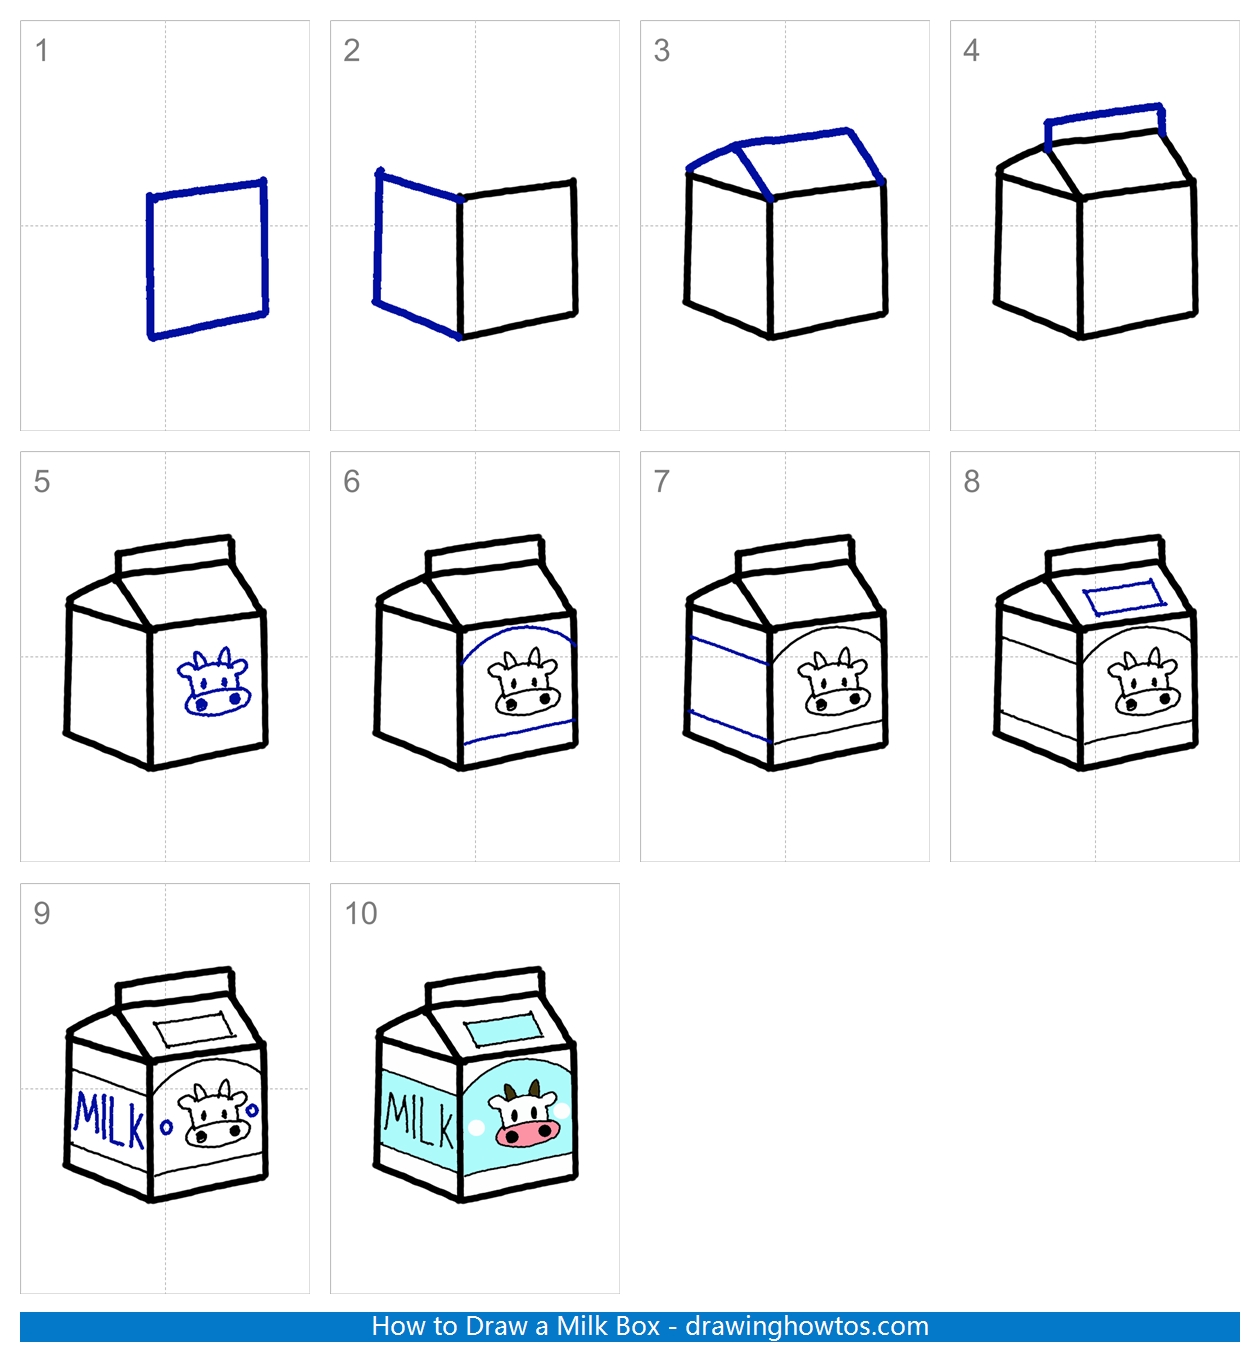 How to Draw a Milk Carton Step by Step